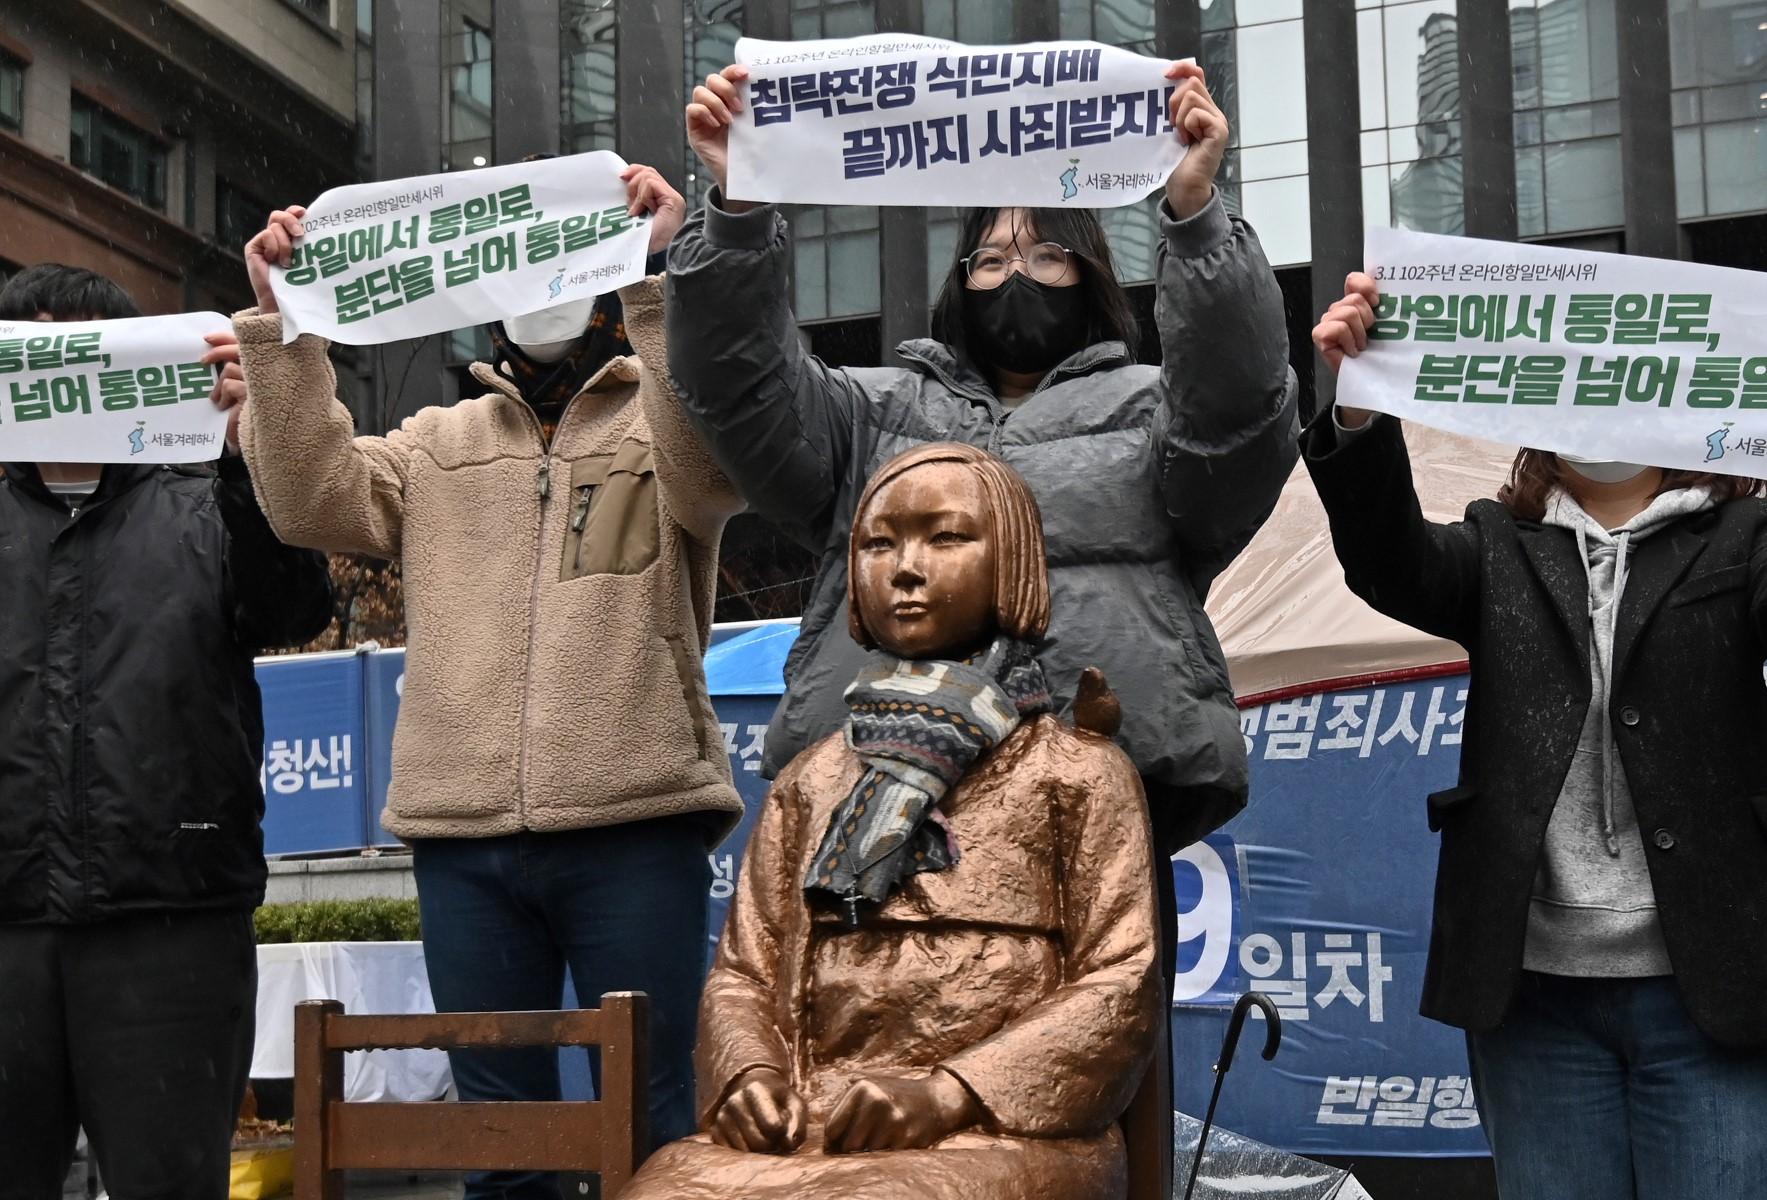 South Korean protesters hold up banners beside a statue (C) of a teenage girl symbolising "comfort women", who served as sex slaves for Japanese soldiers during World War II, near the Japanese embassy in Seoul on March 1, 2021, the 102nd anniversary of the Independence Movement Day against the 1910-1945 Japanese colonial rule. (Photo by Jung Yeon-je / AFP)